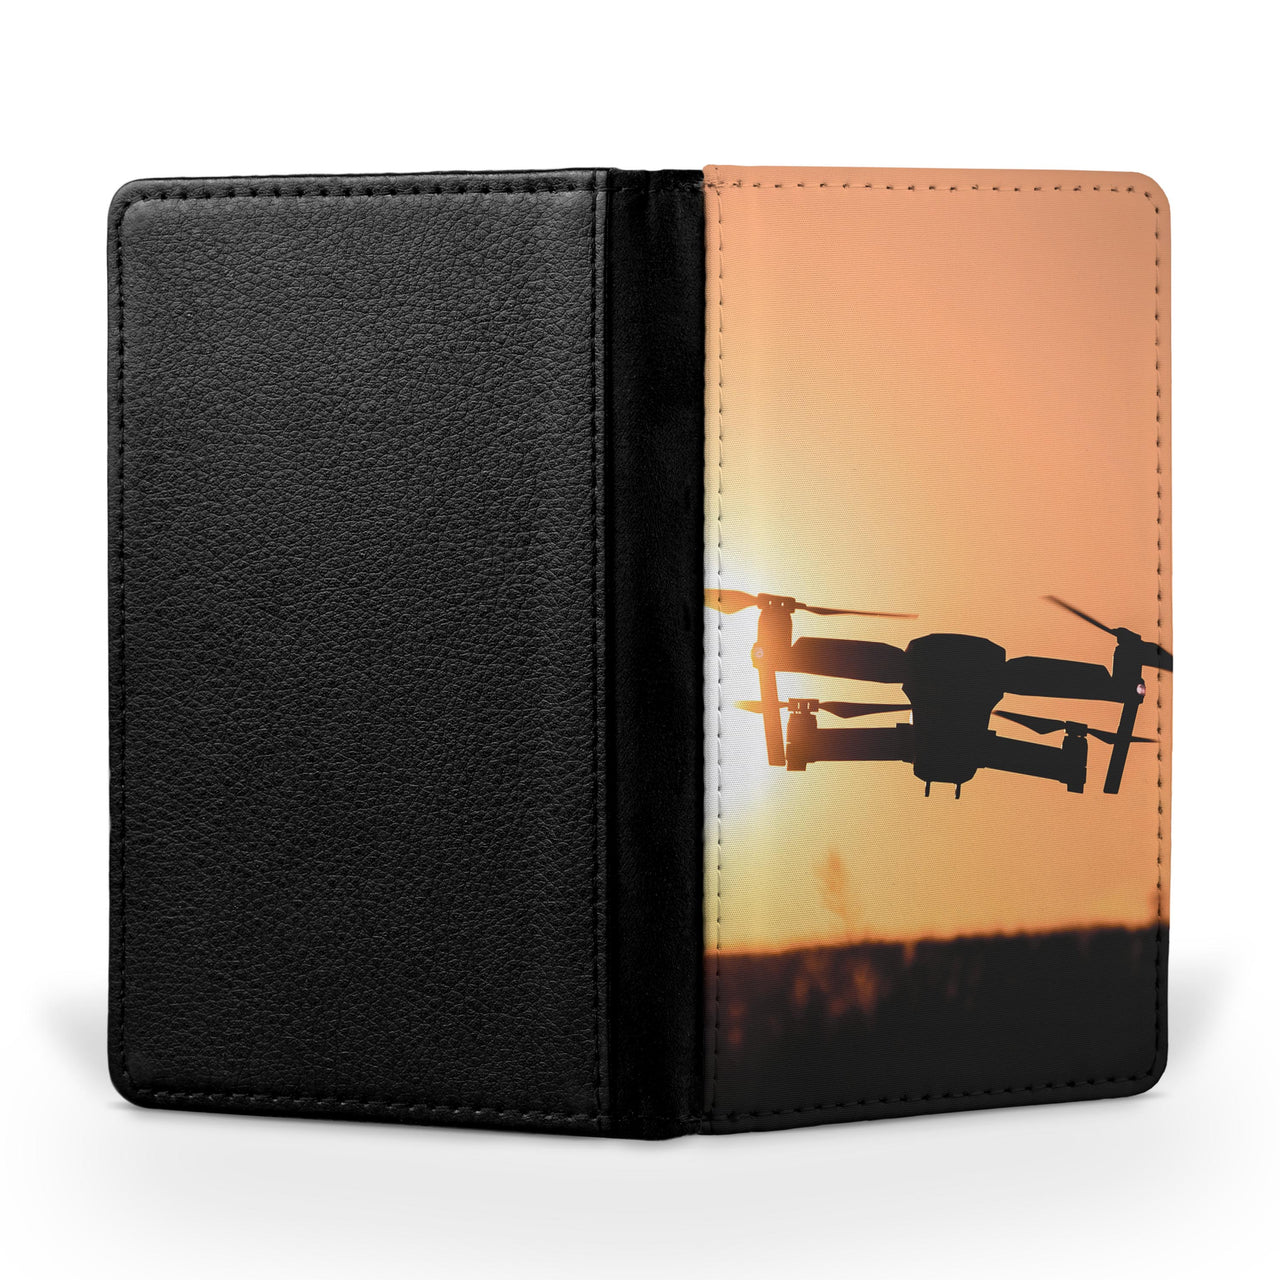 Amazing Drone in Sunset Printed Passport & Travel Cases